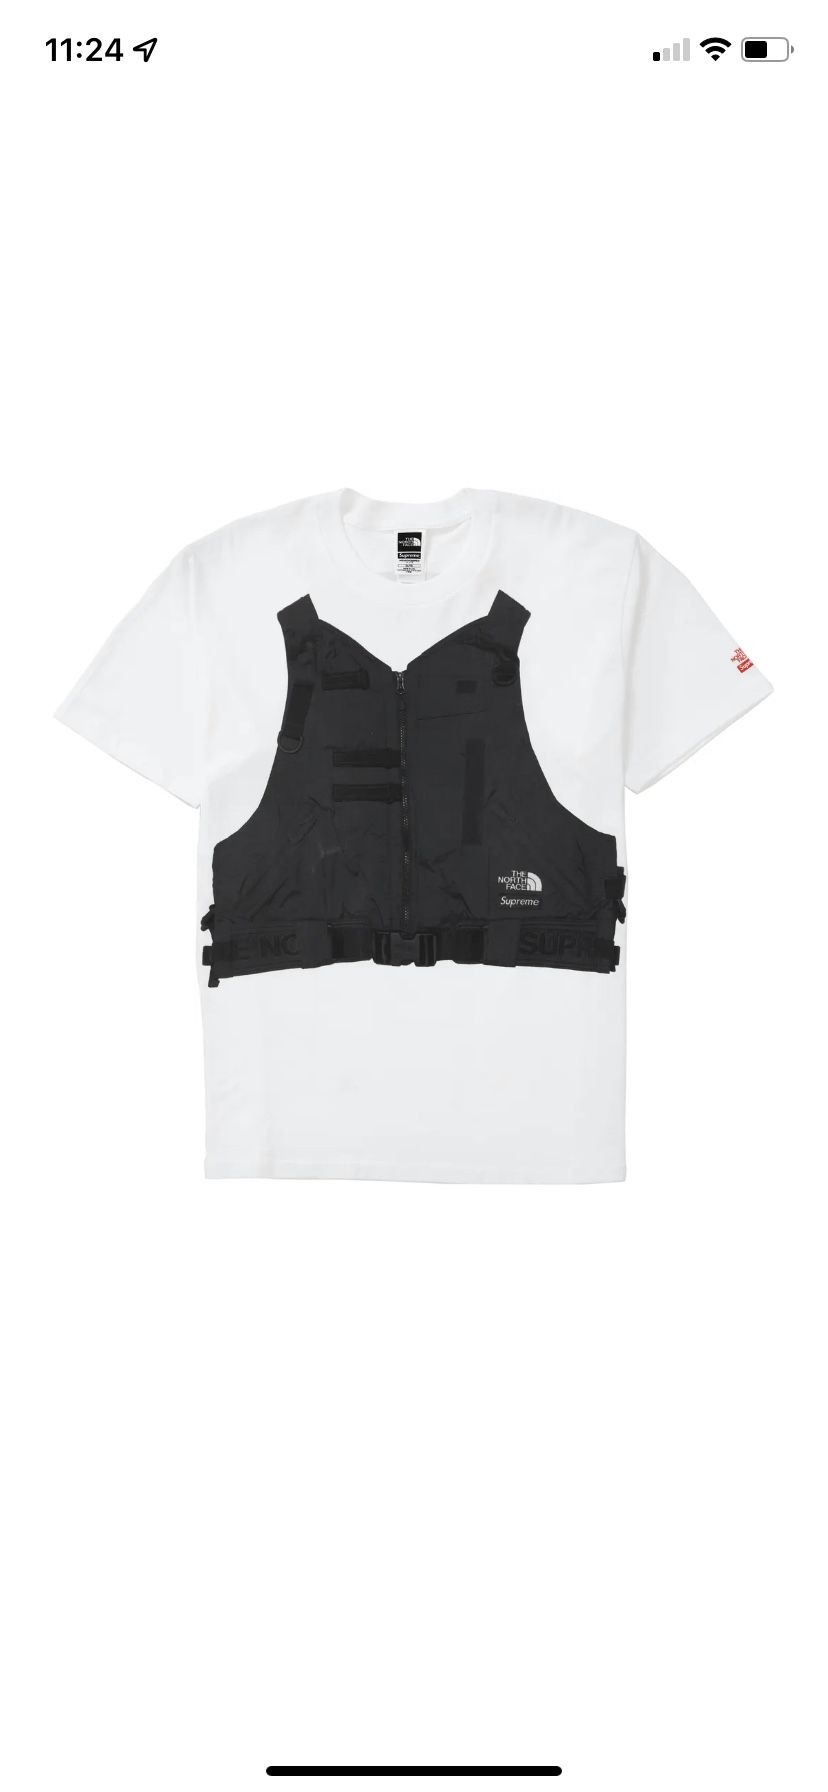 The North Face/ Supreme RTG White Tee